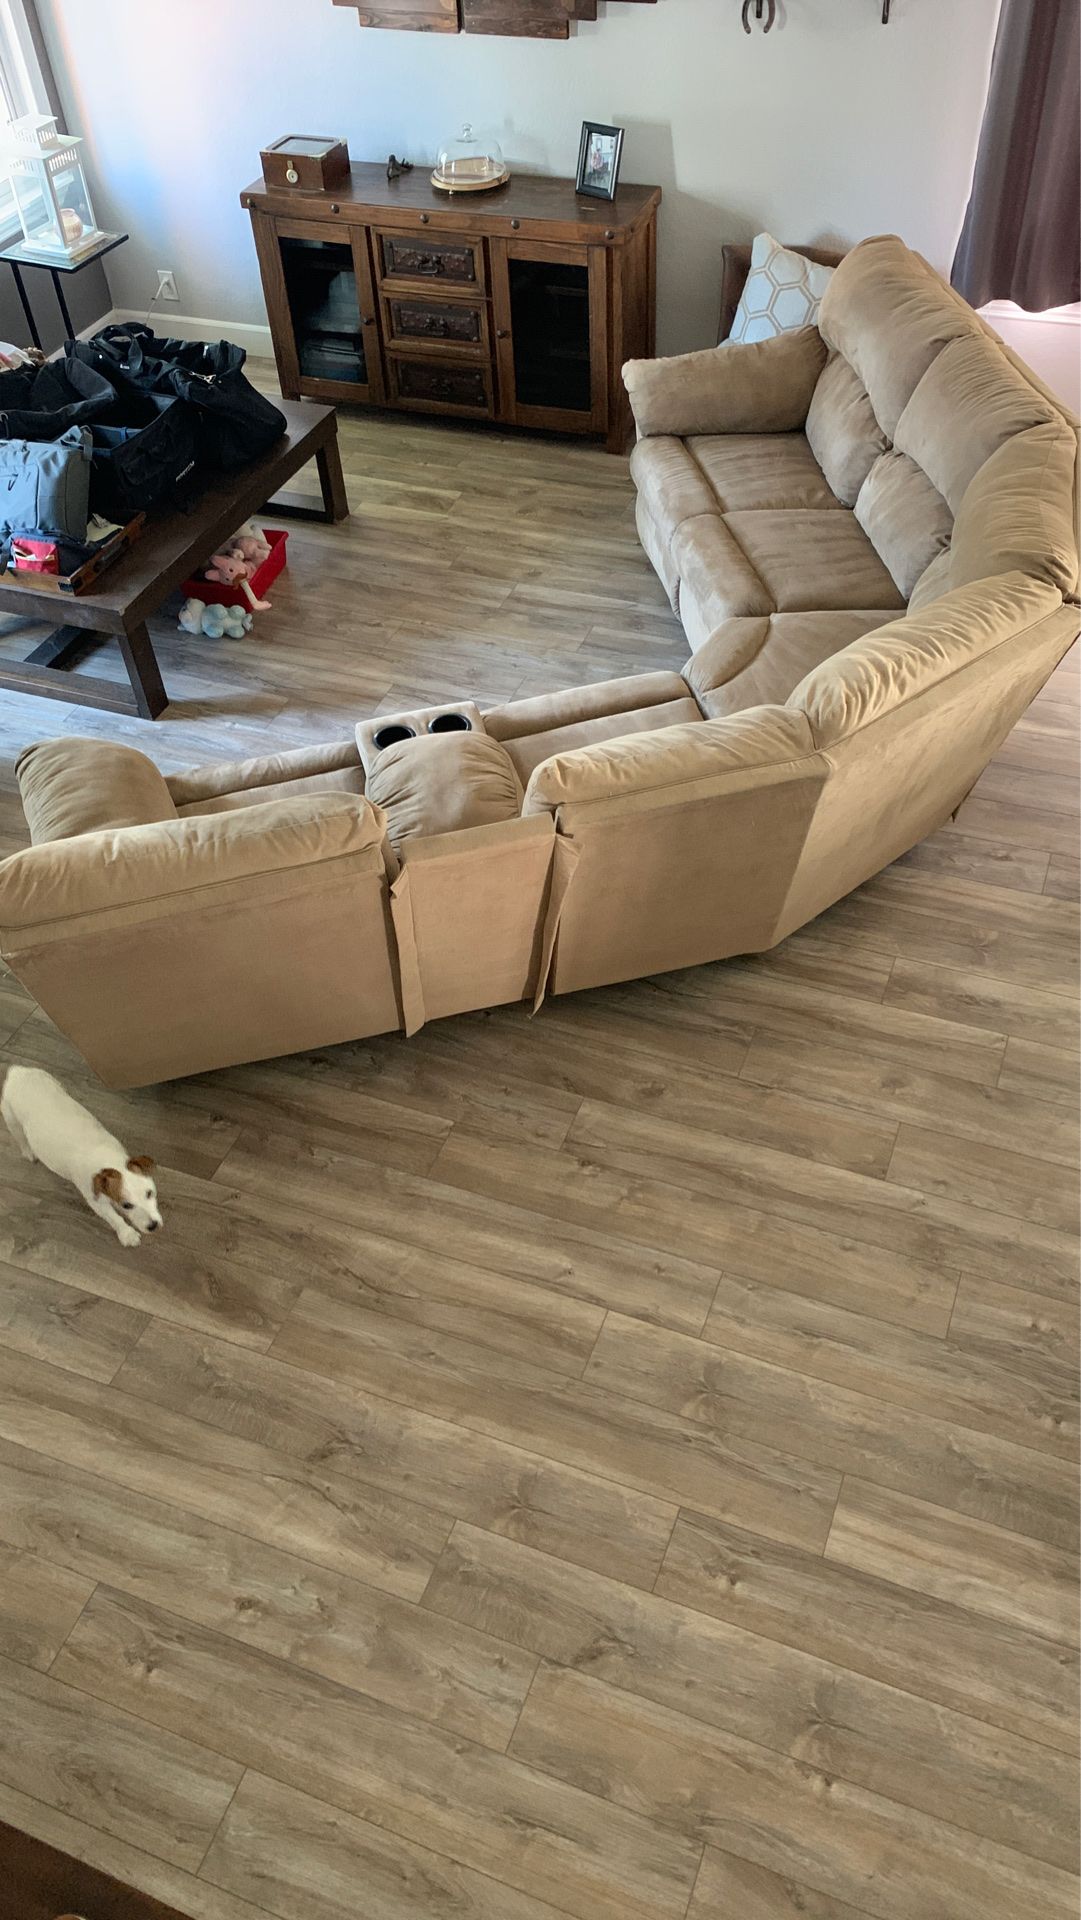 Extran large couch